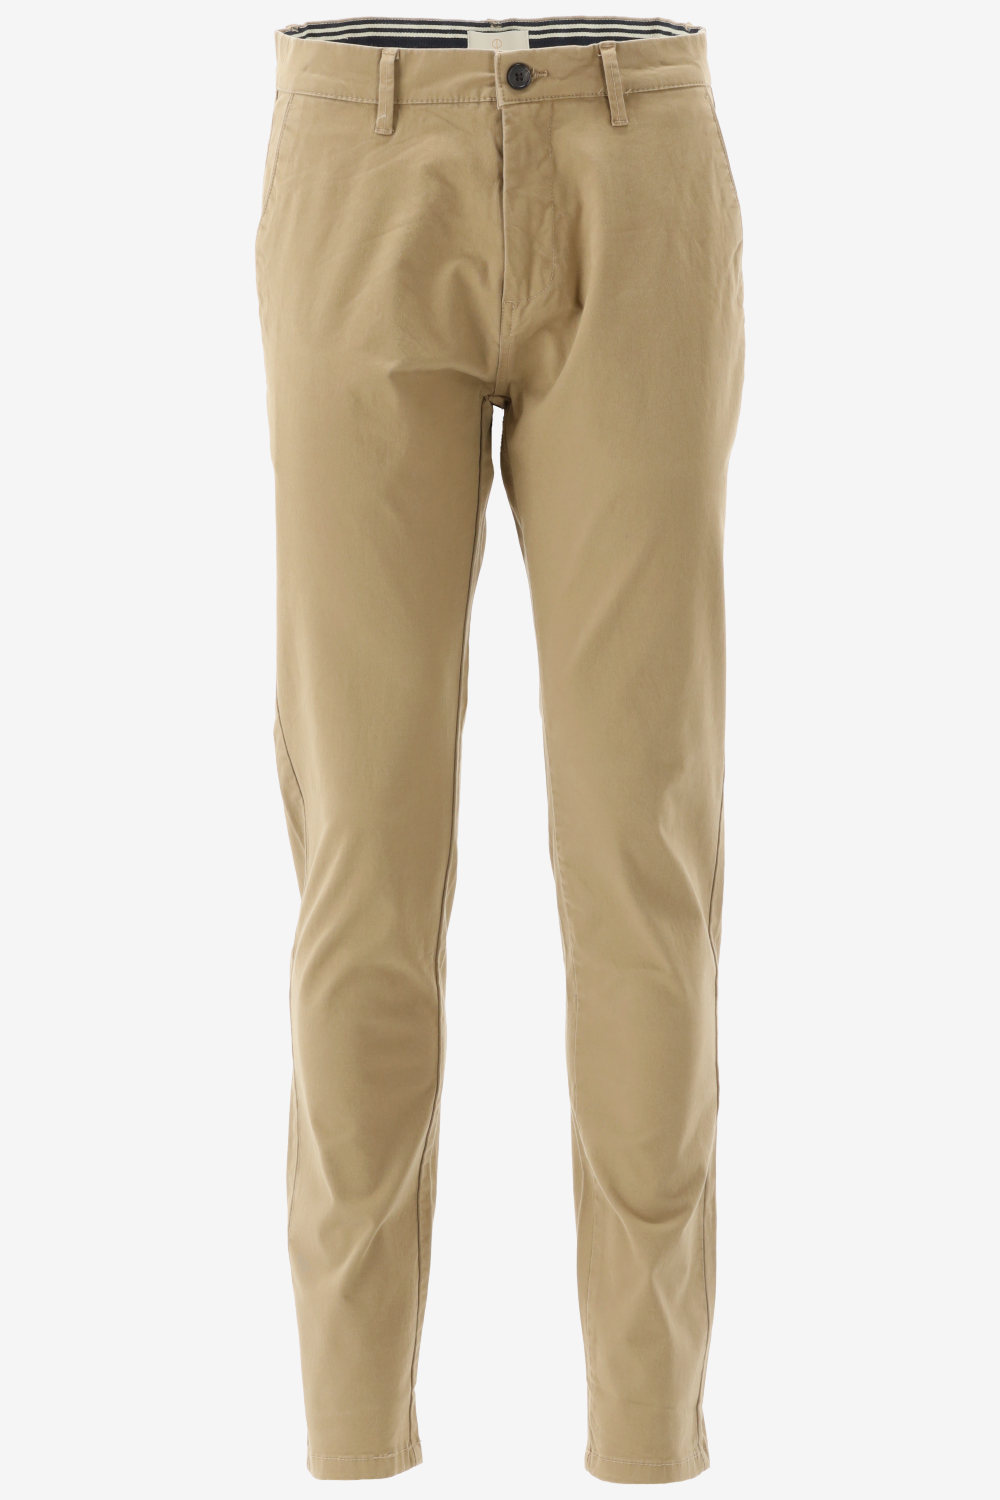 Dstrezzed chino charlie maat 29-L34